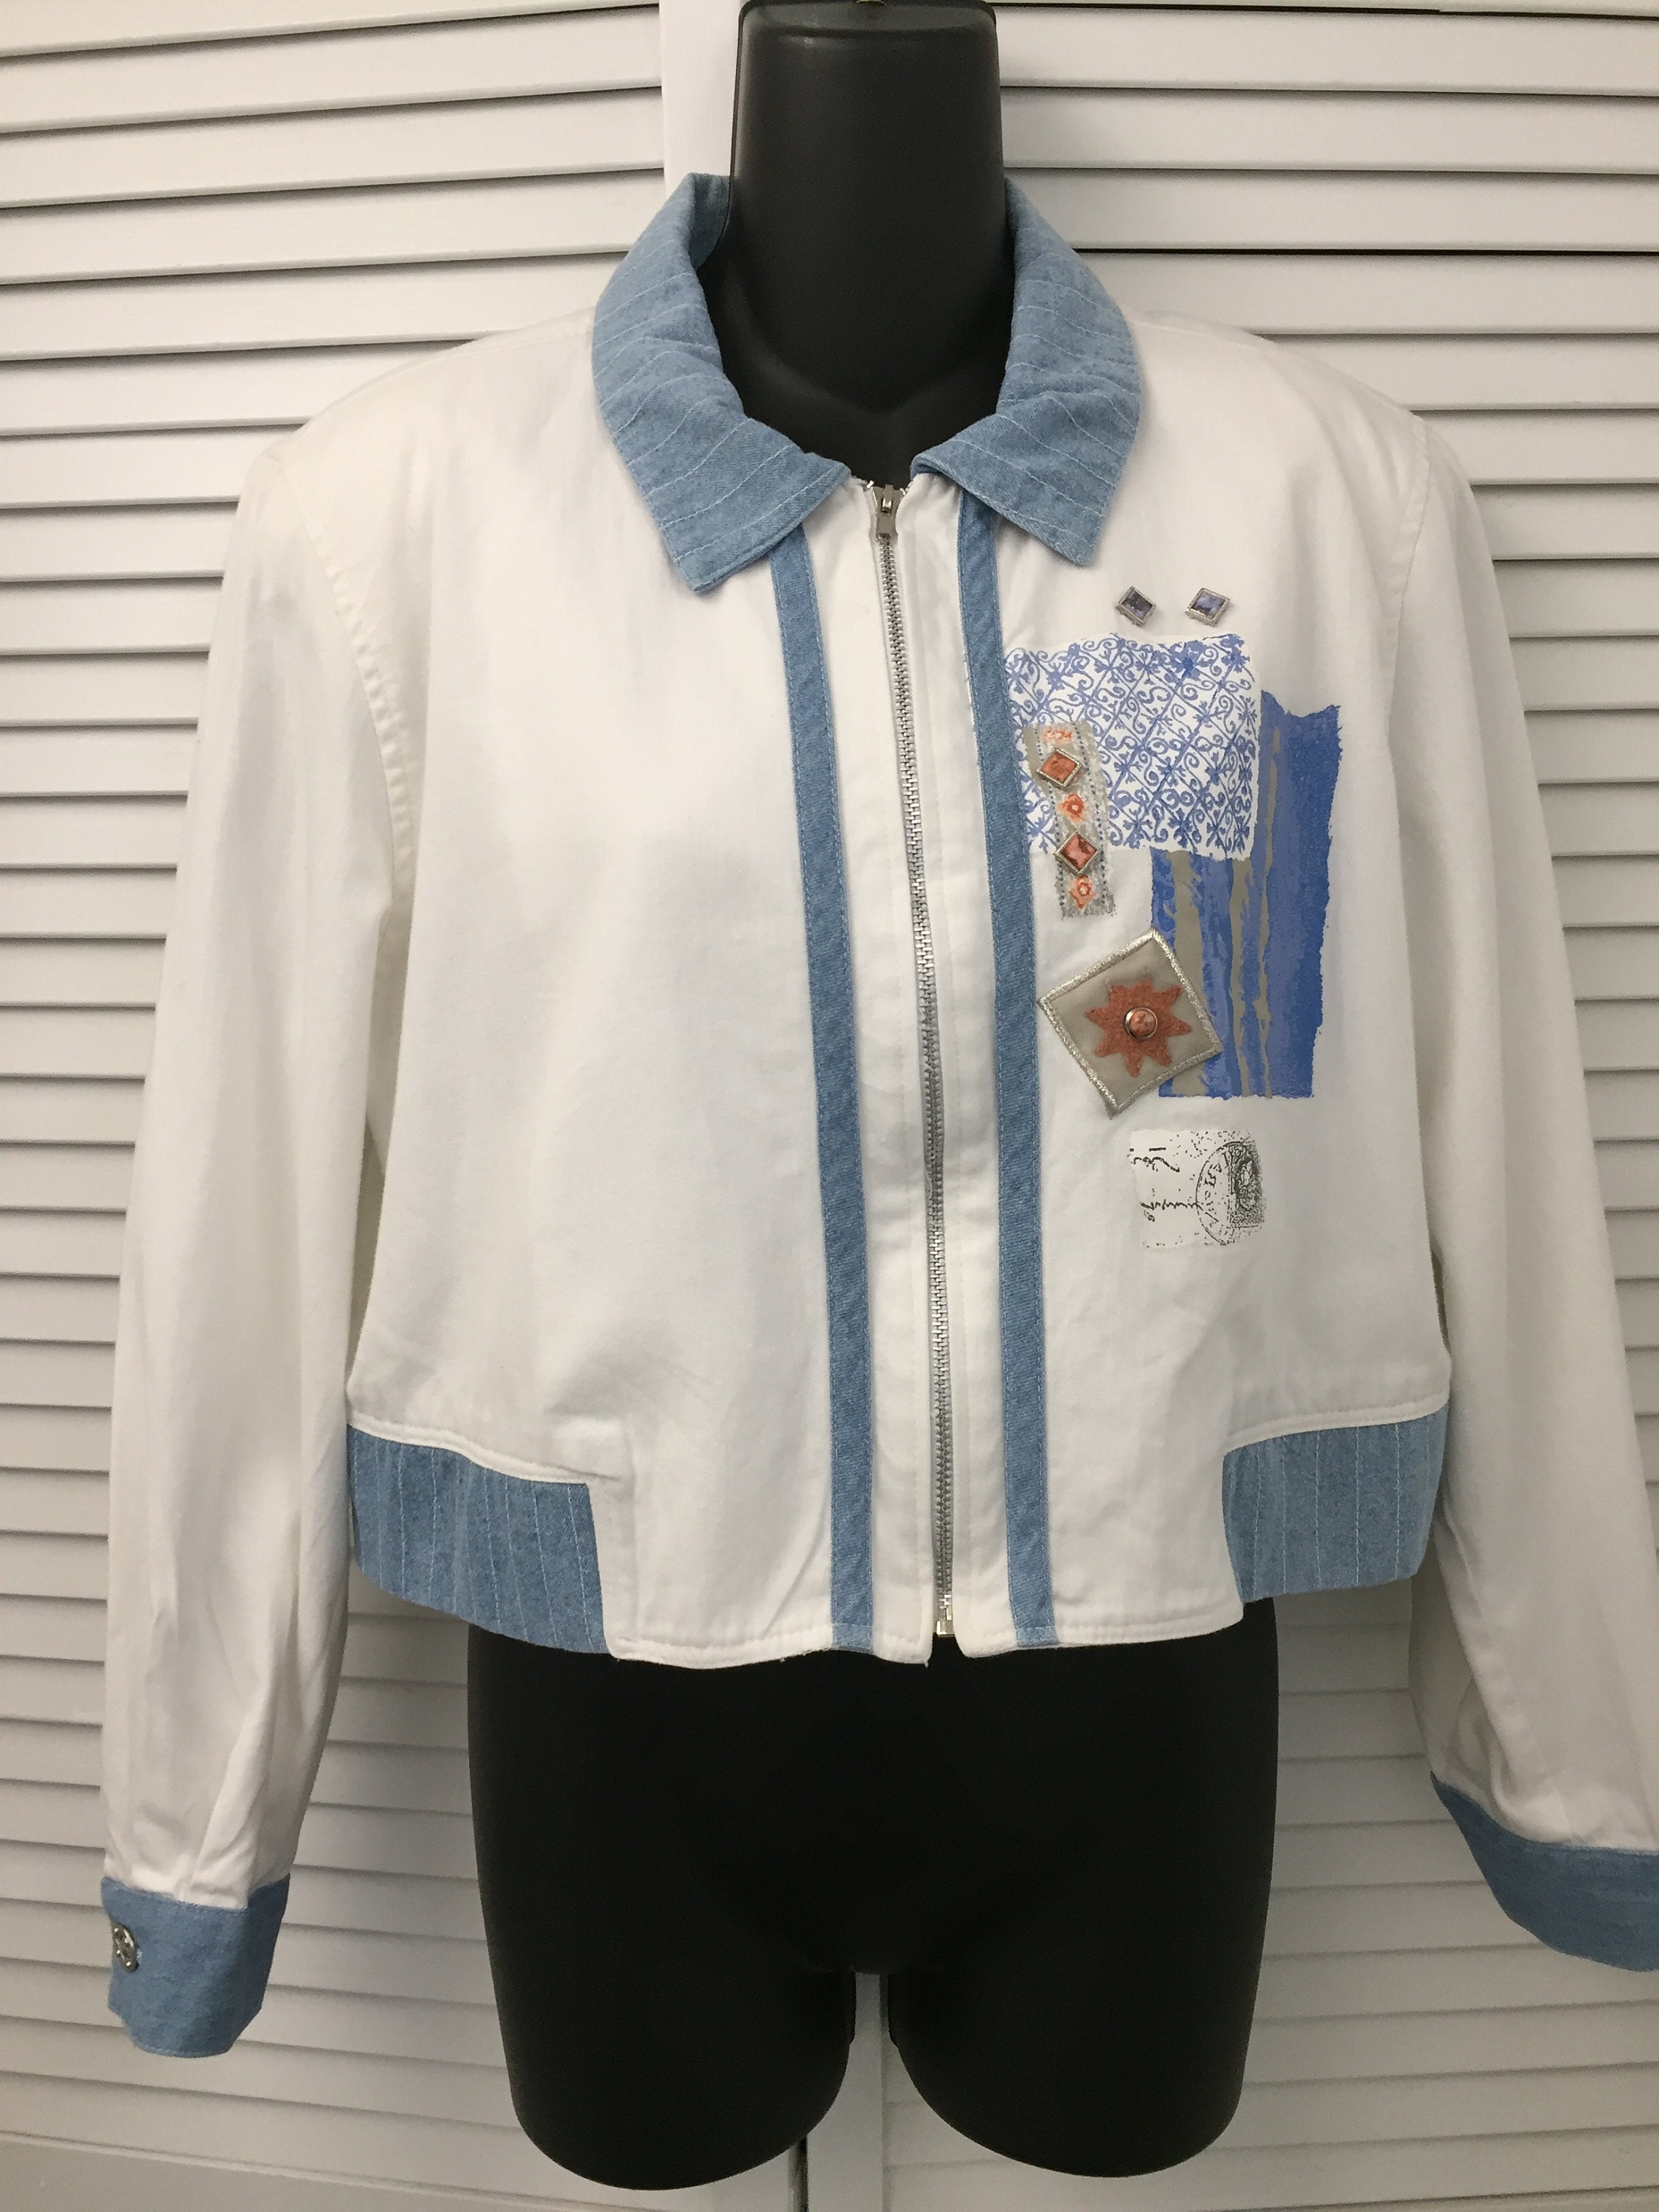 VTG city girl yellow jean jacket with embroidery.